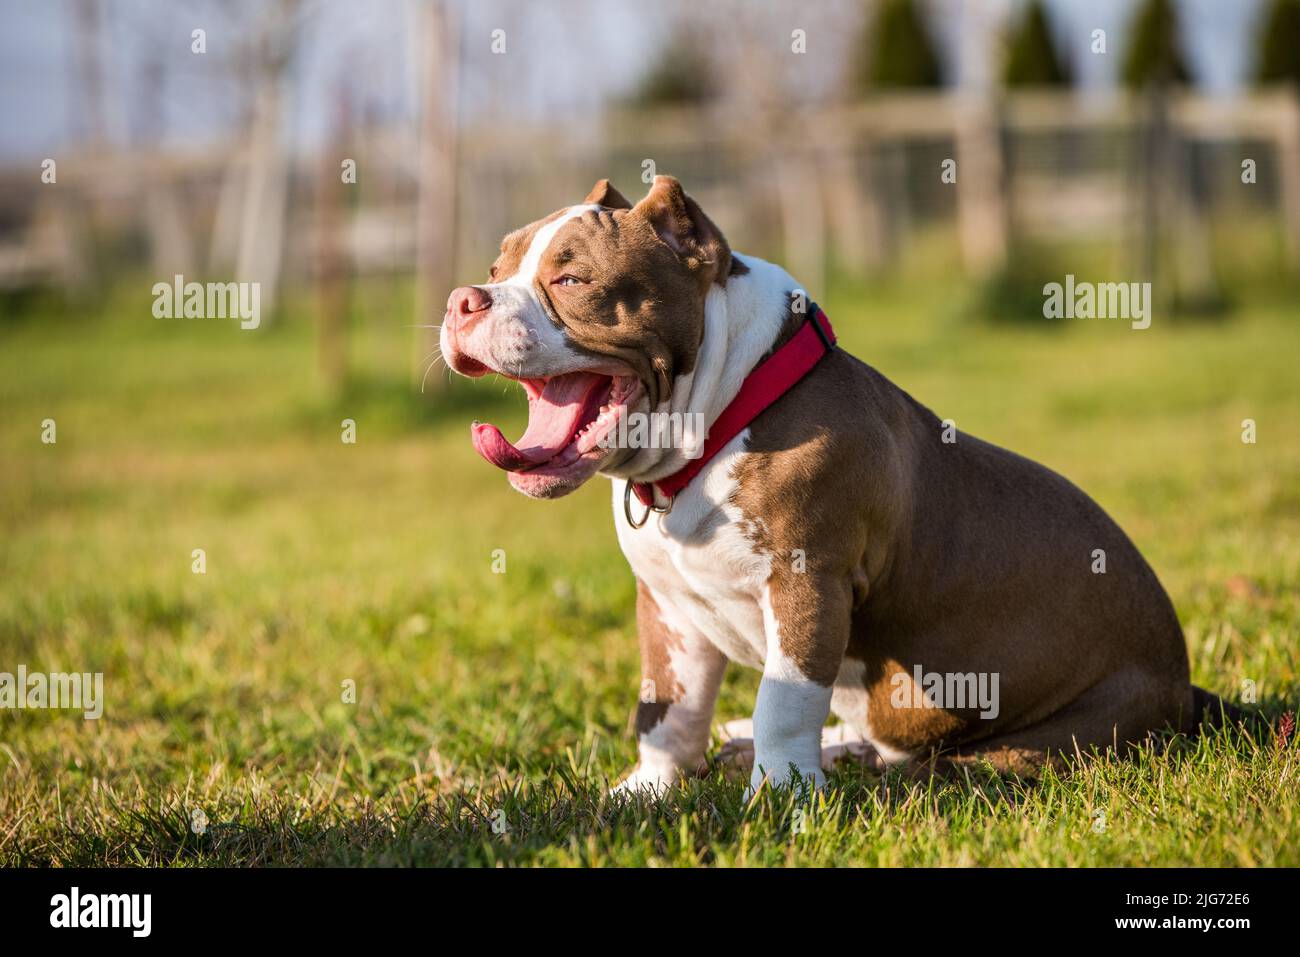 Chocolate color American Bully dog yawns green grass Stock Photo